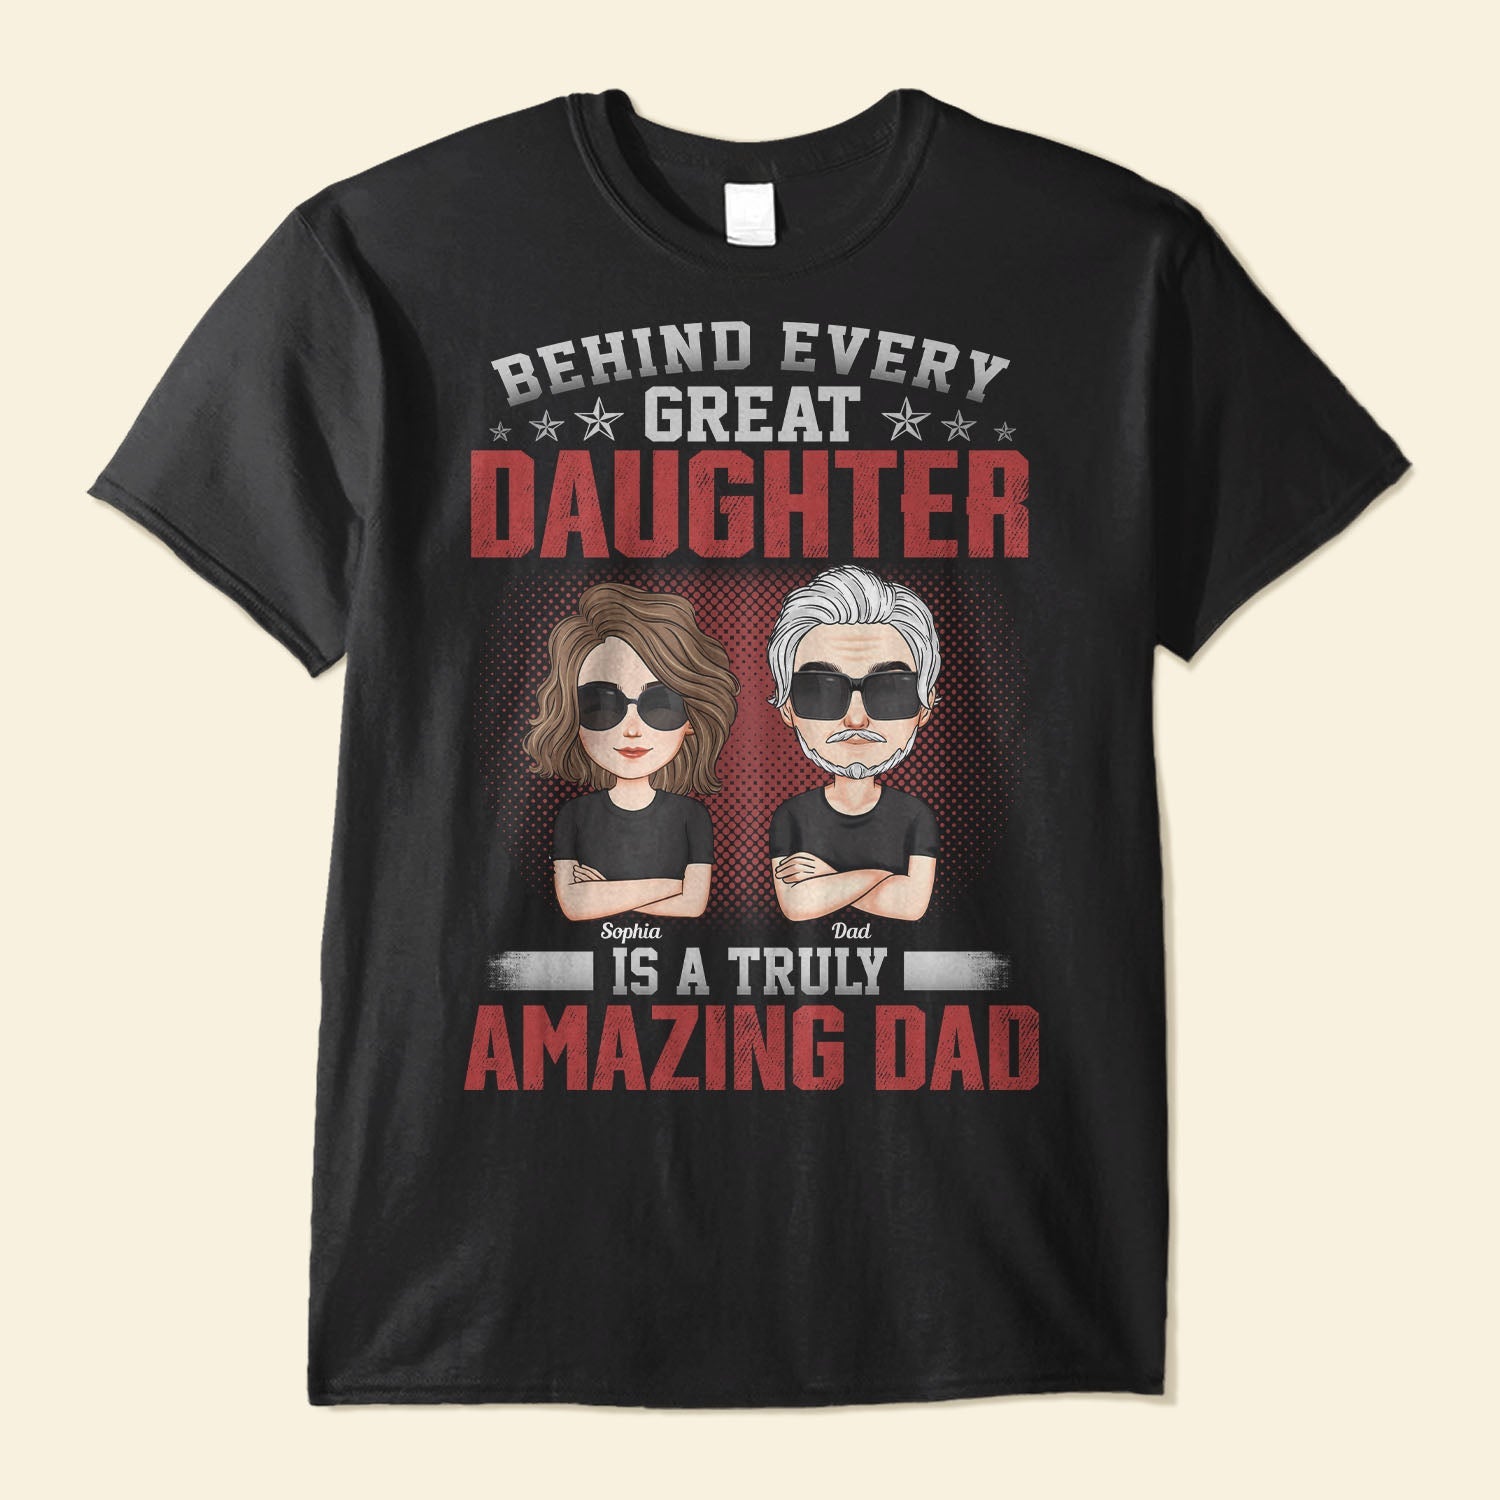 Dad and Daughter Shirt - Behind Every Great Daughter is a Truly Amazing Dad